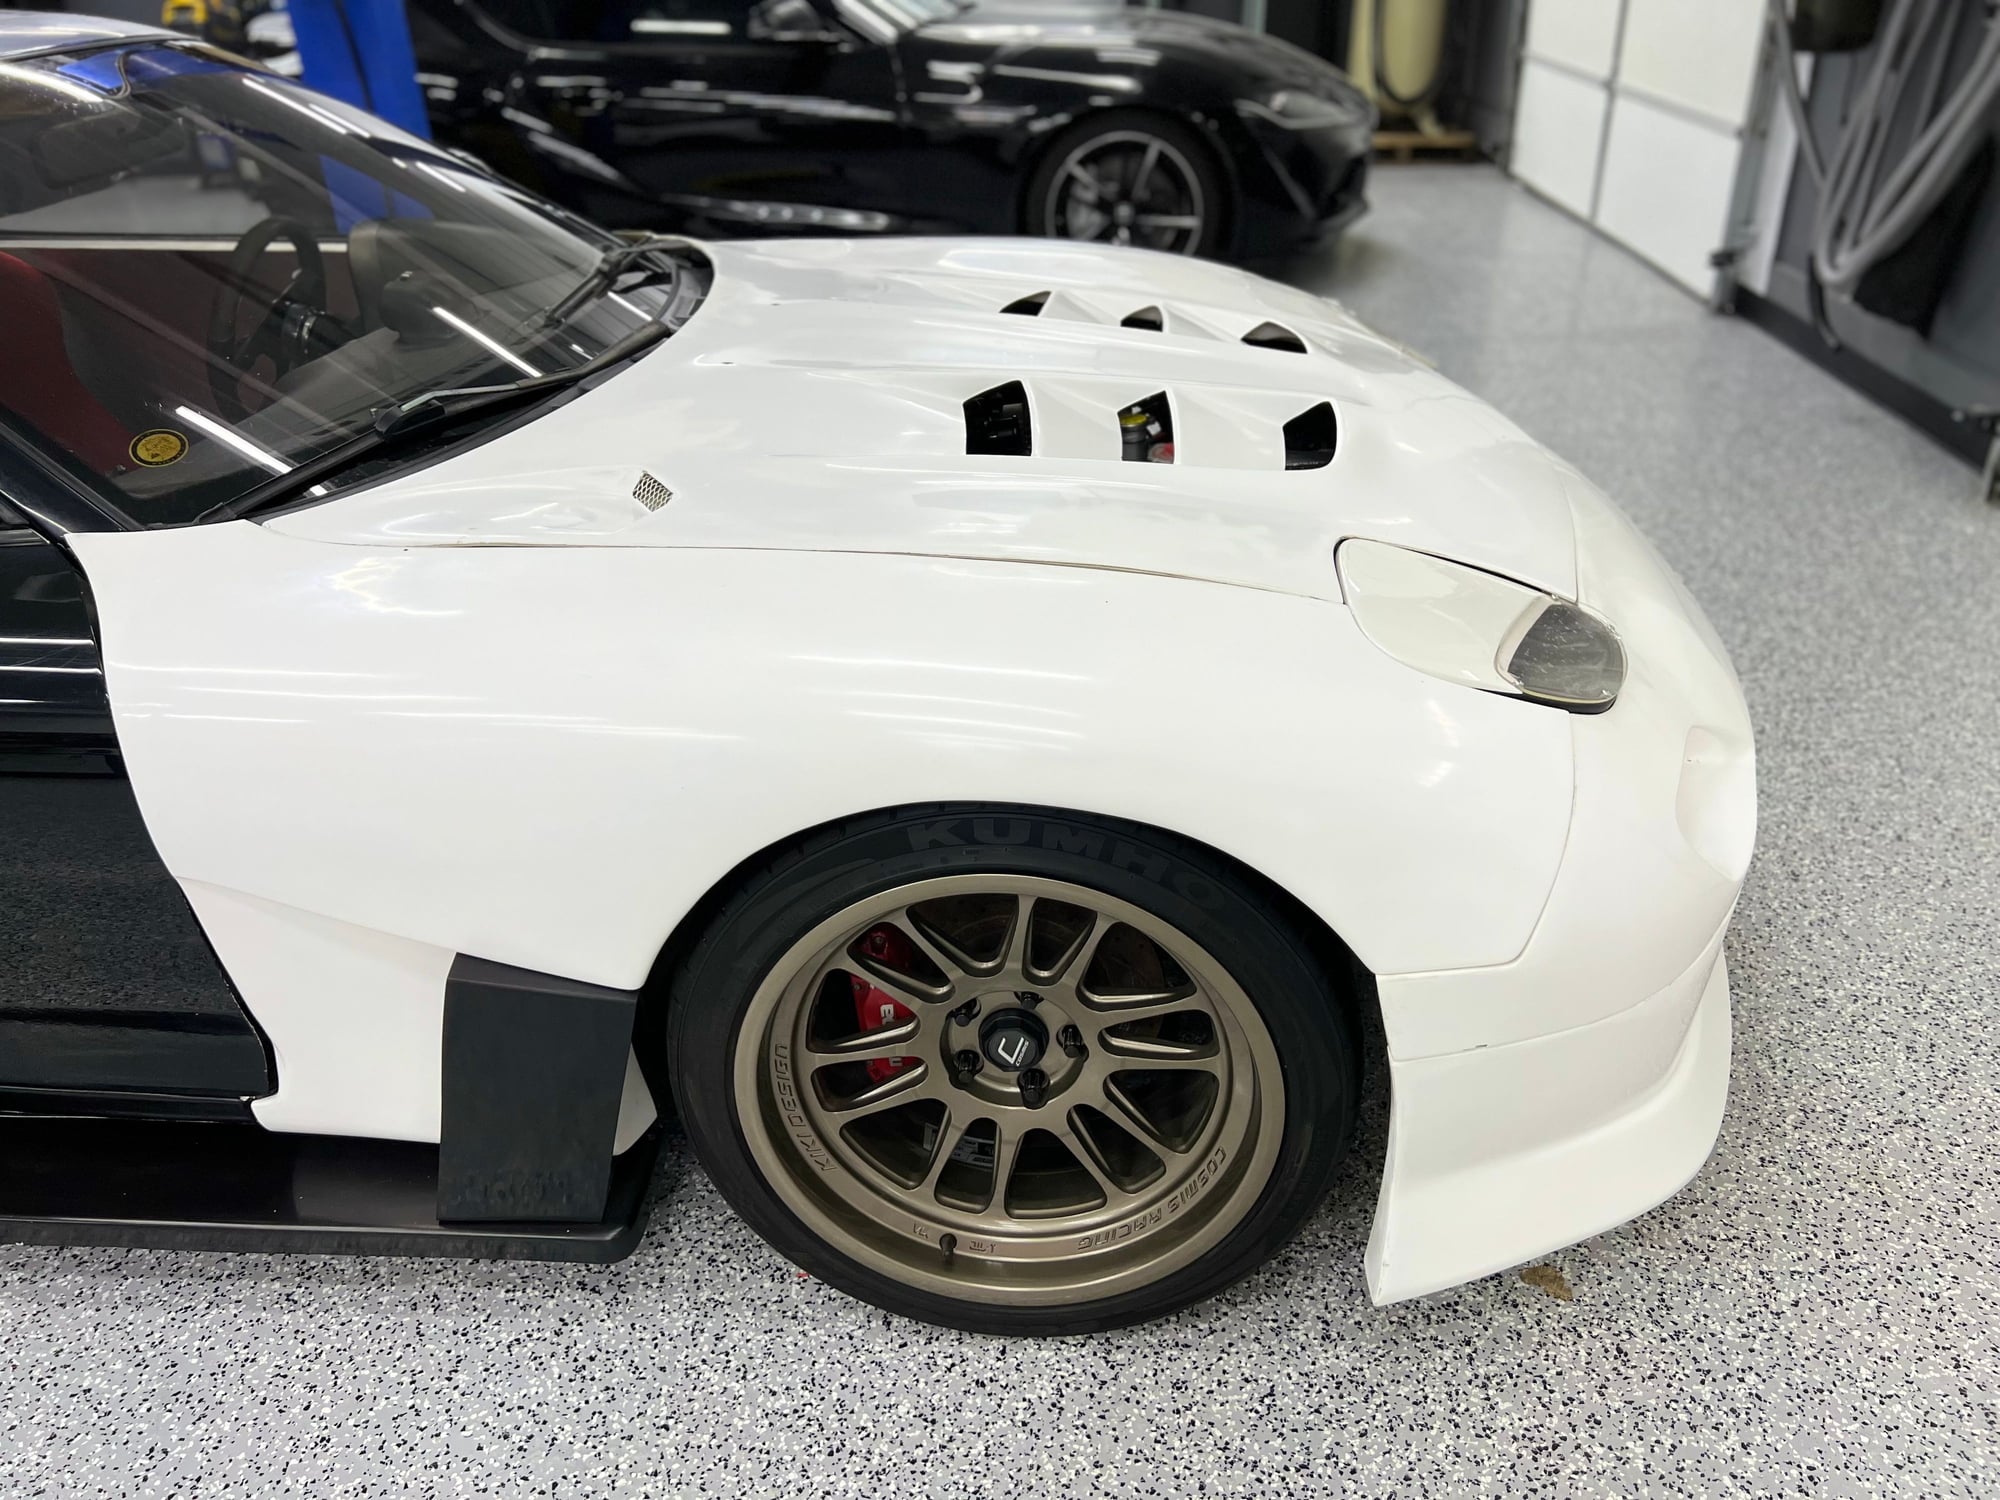 1993 Mazda RX-7 - 1993 Rx7 FD - widebody - single turbo - fuel cell - highly modified - Used - VIN JM1FD3315P0208924 - 95,000 Miles - Other - 2WD - Manual - Coupe - Black - Palmetto, FL 34221, United States